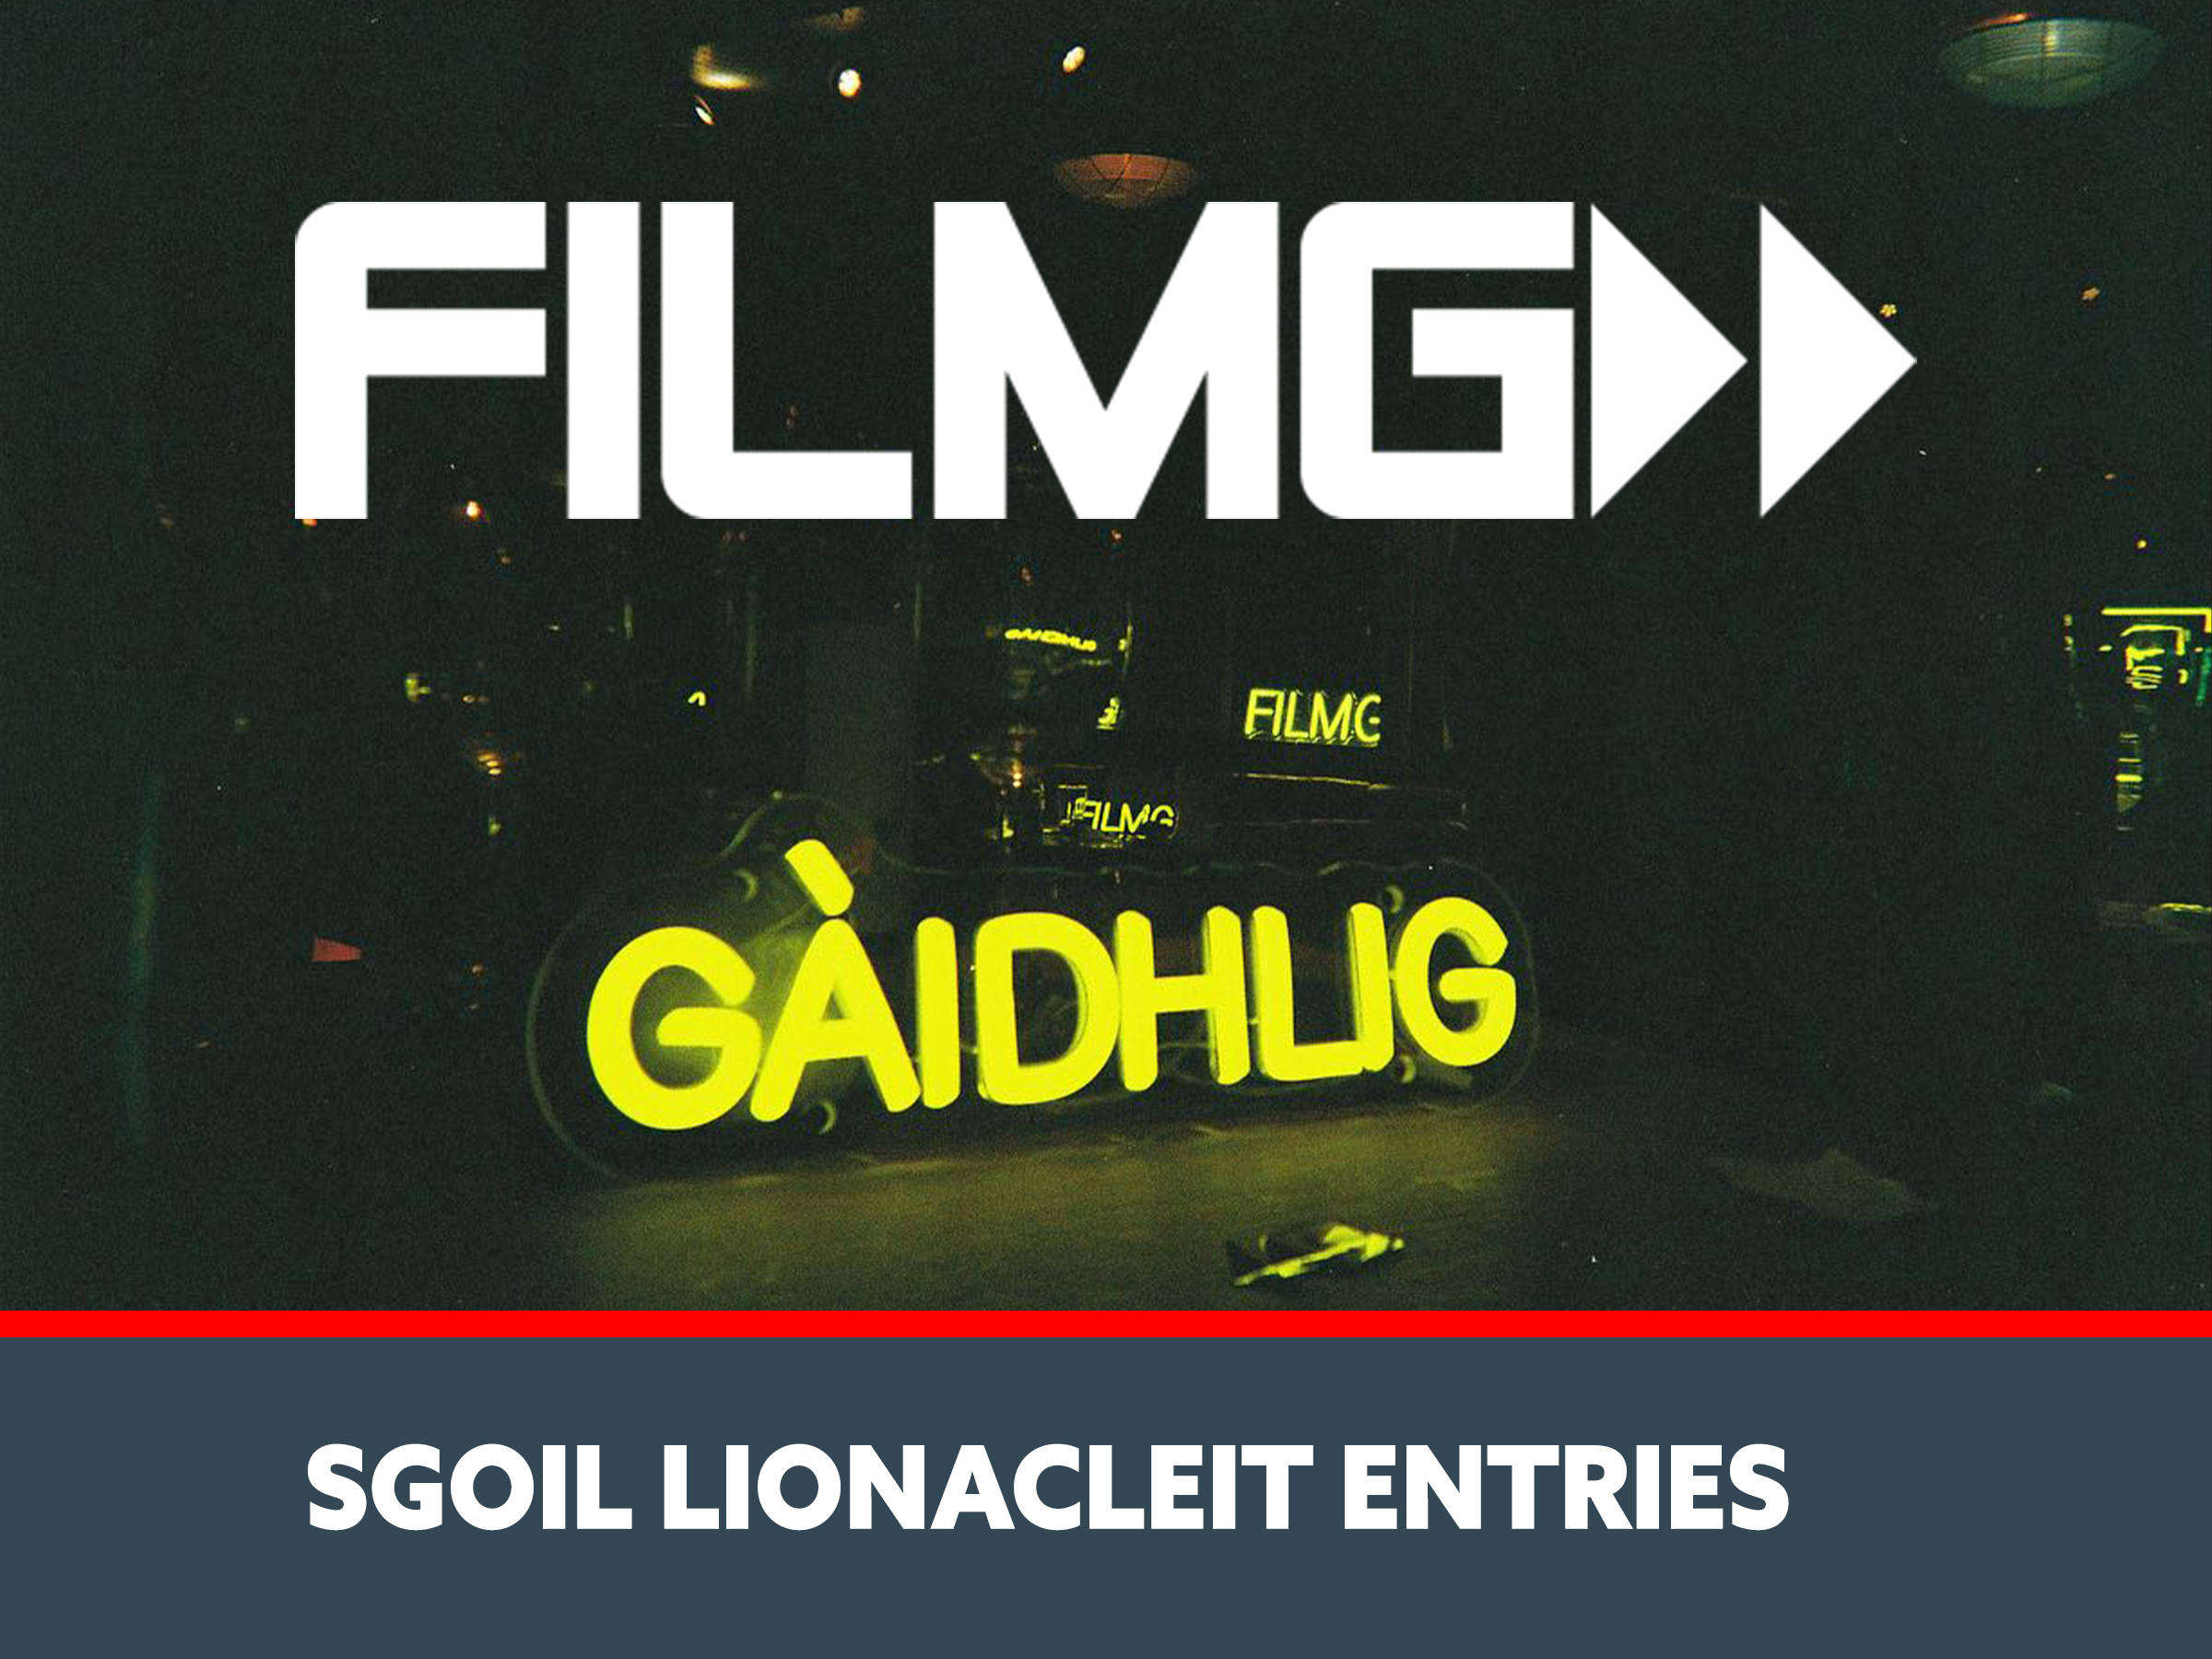 A link to all Sgoil lionacleits' FilmG entries.